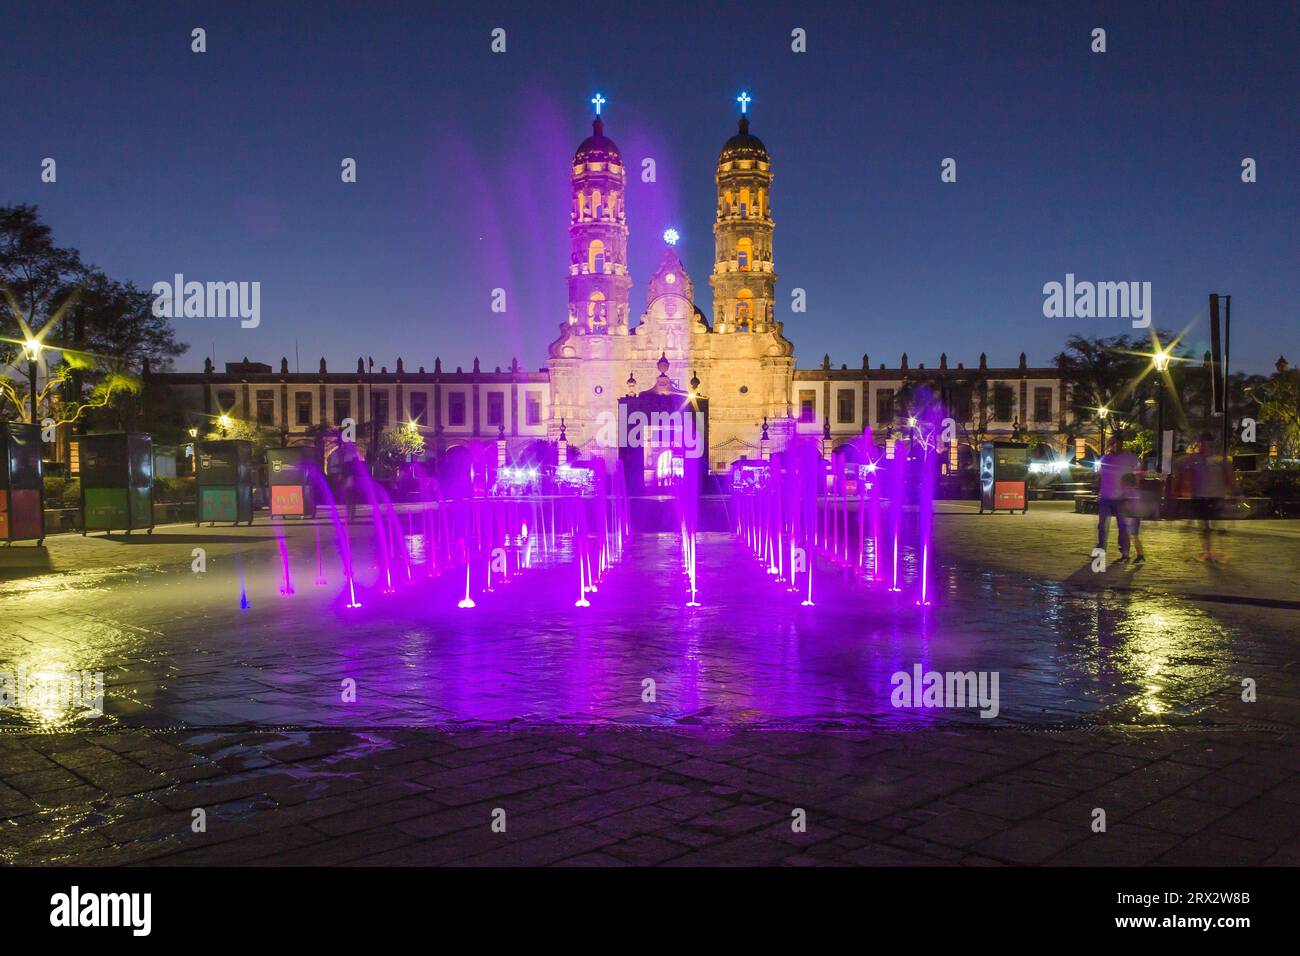 Zapopan Basilica, Guadalajara, Mexico, illuminated by spotlights at night and by coloured water fountains in the foreground. Stock Photo